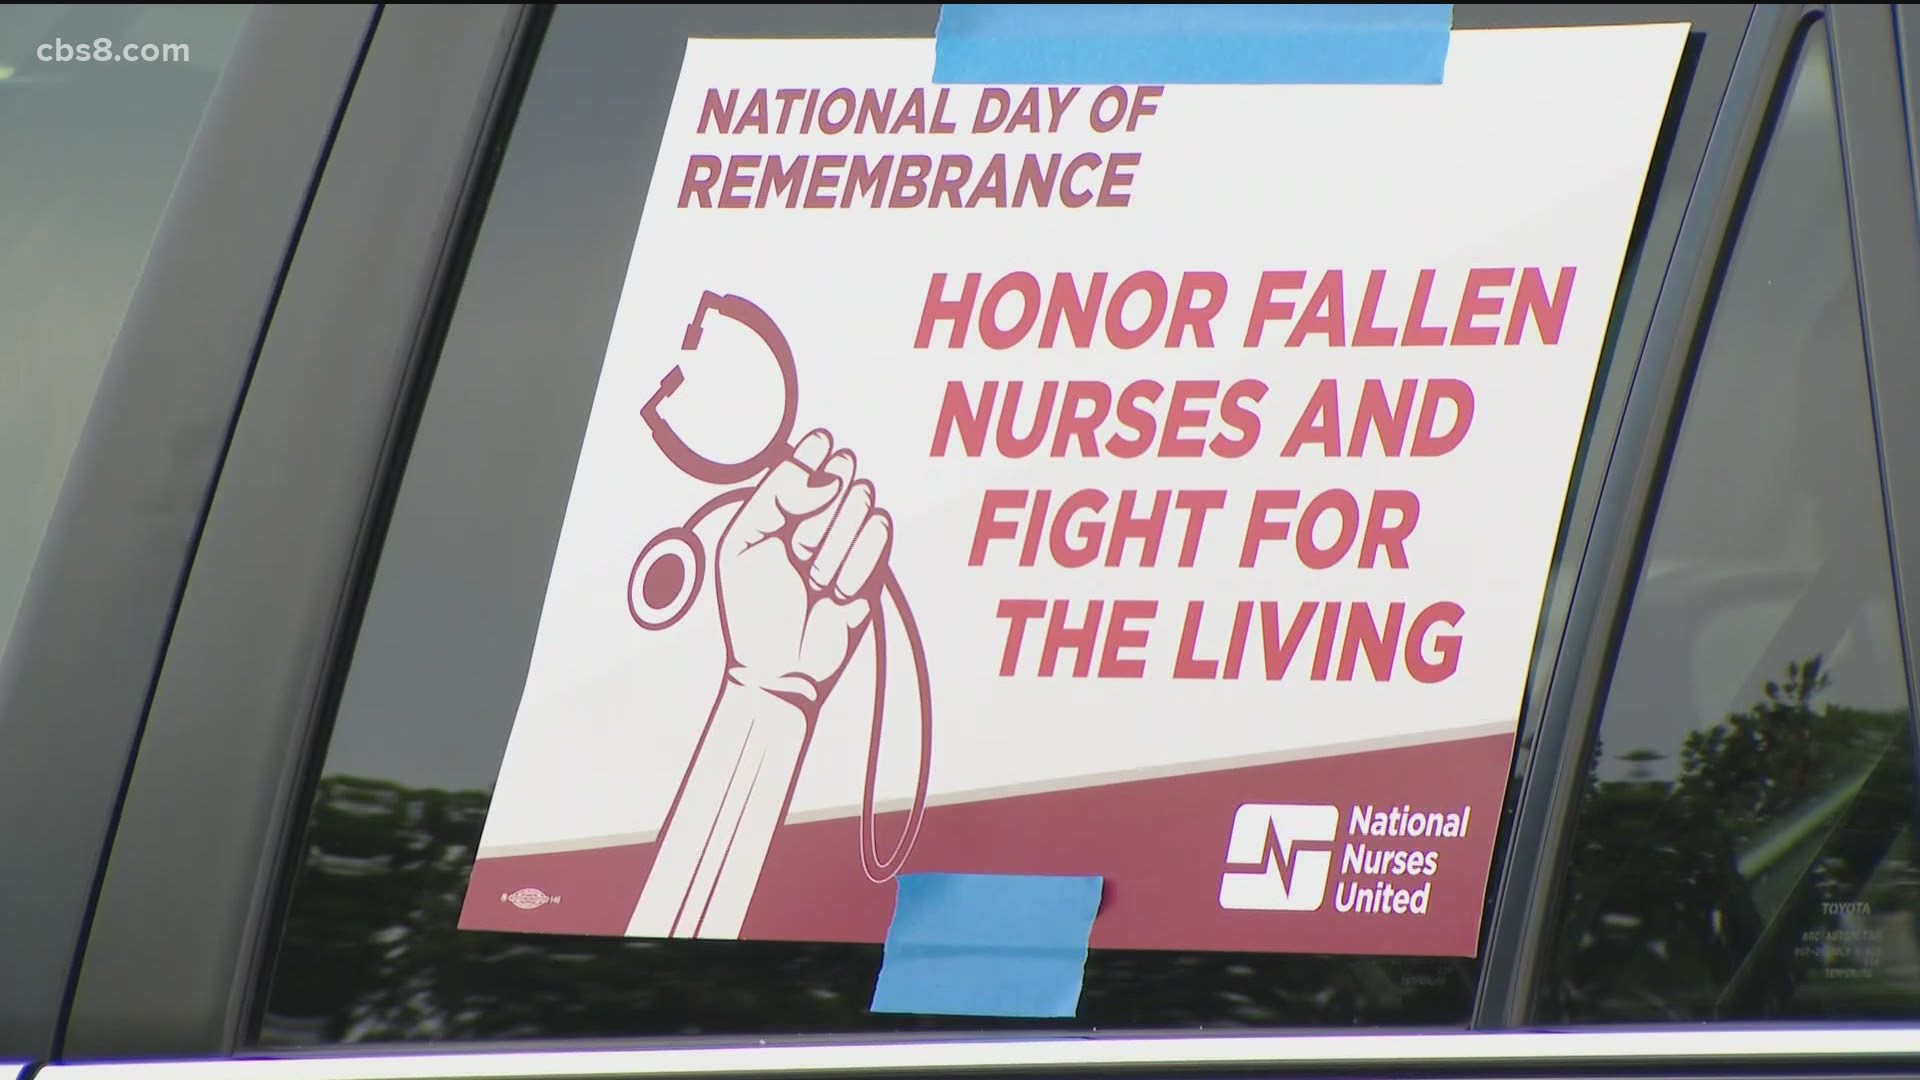 41 nurses in California and more than 400 nurses nationwide lost their lives.